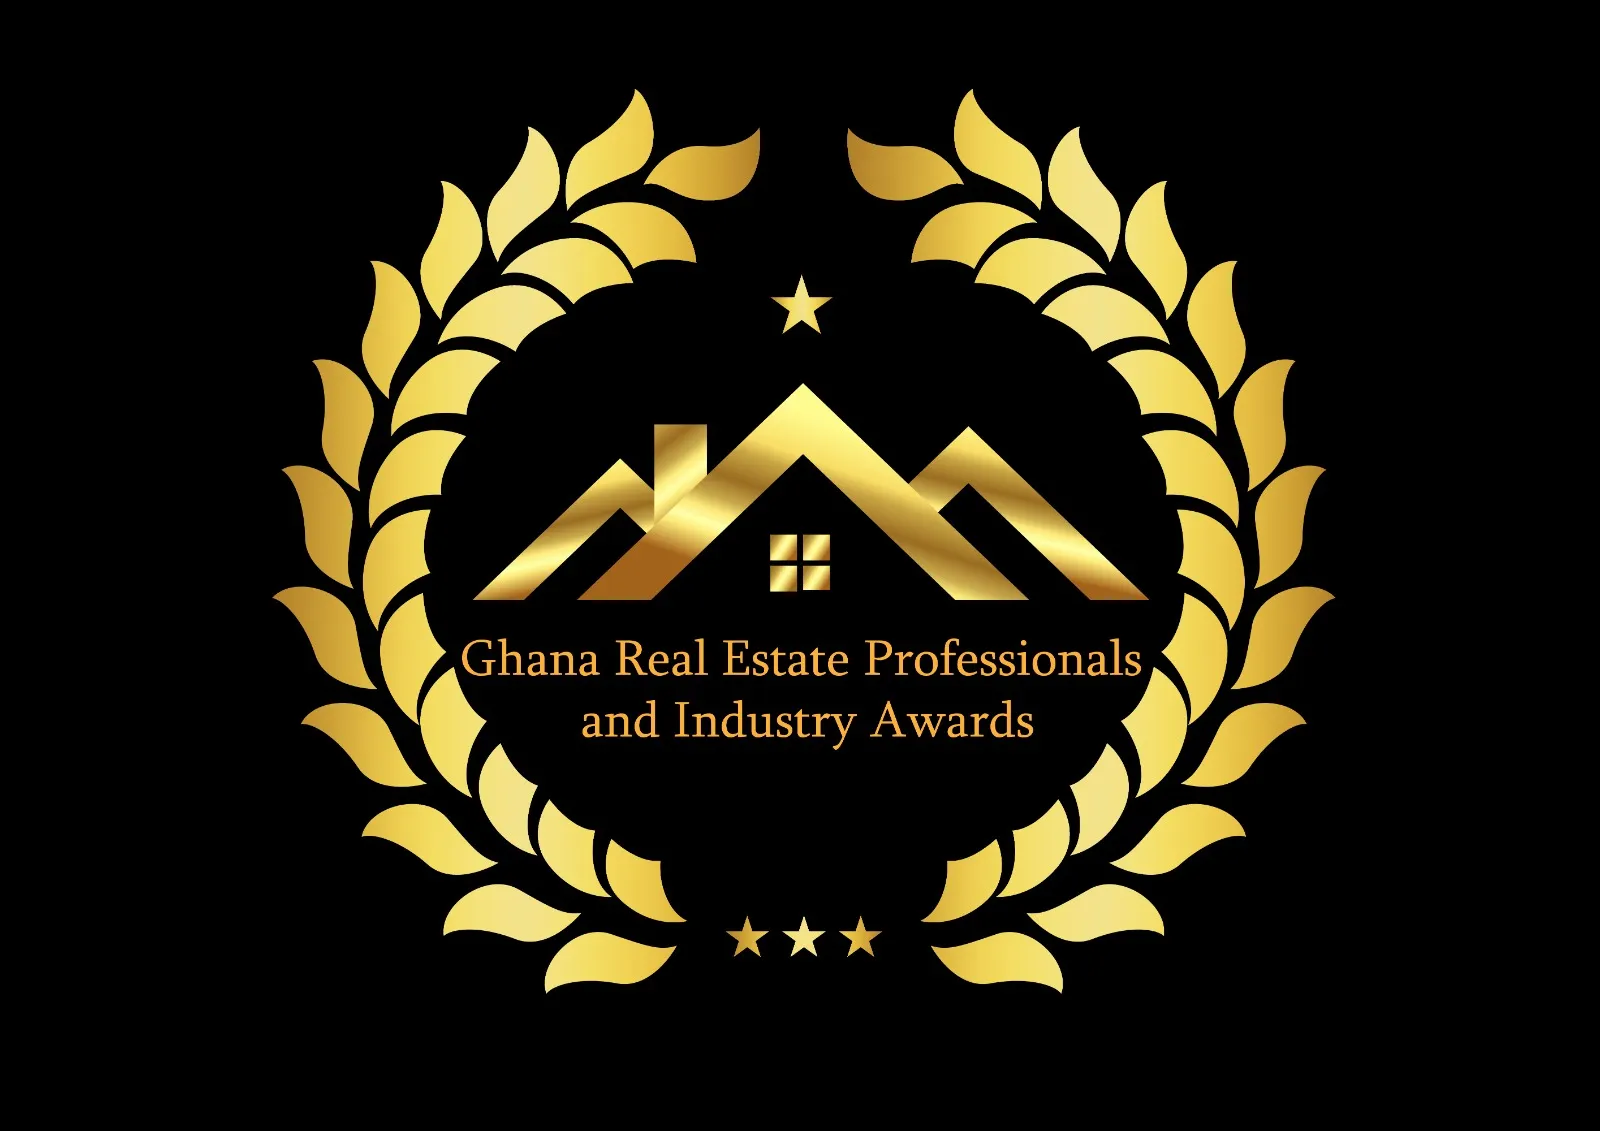 Ghana Real Estate Professionals and Industry Awards -GREIPAG